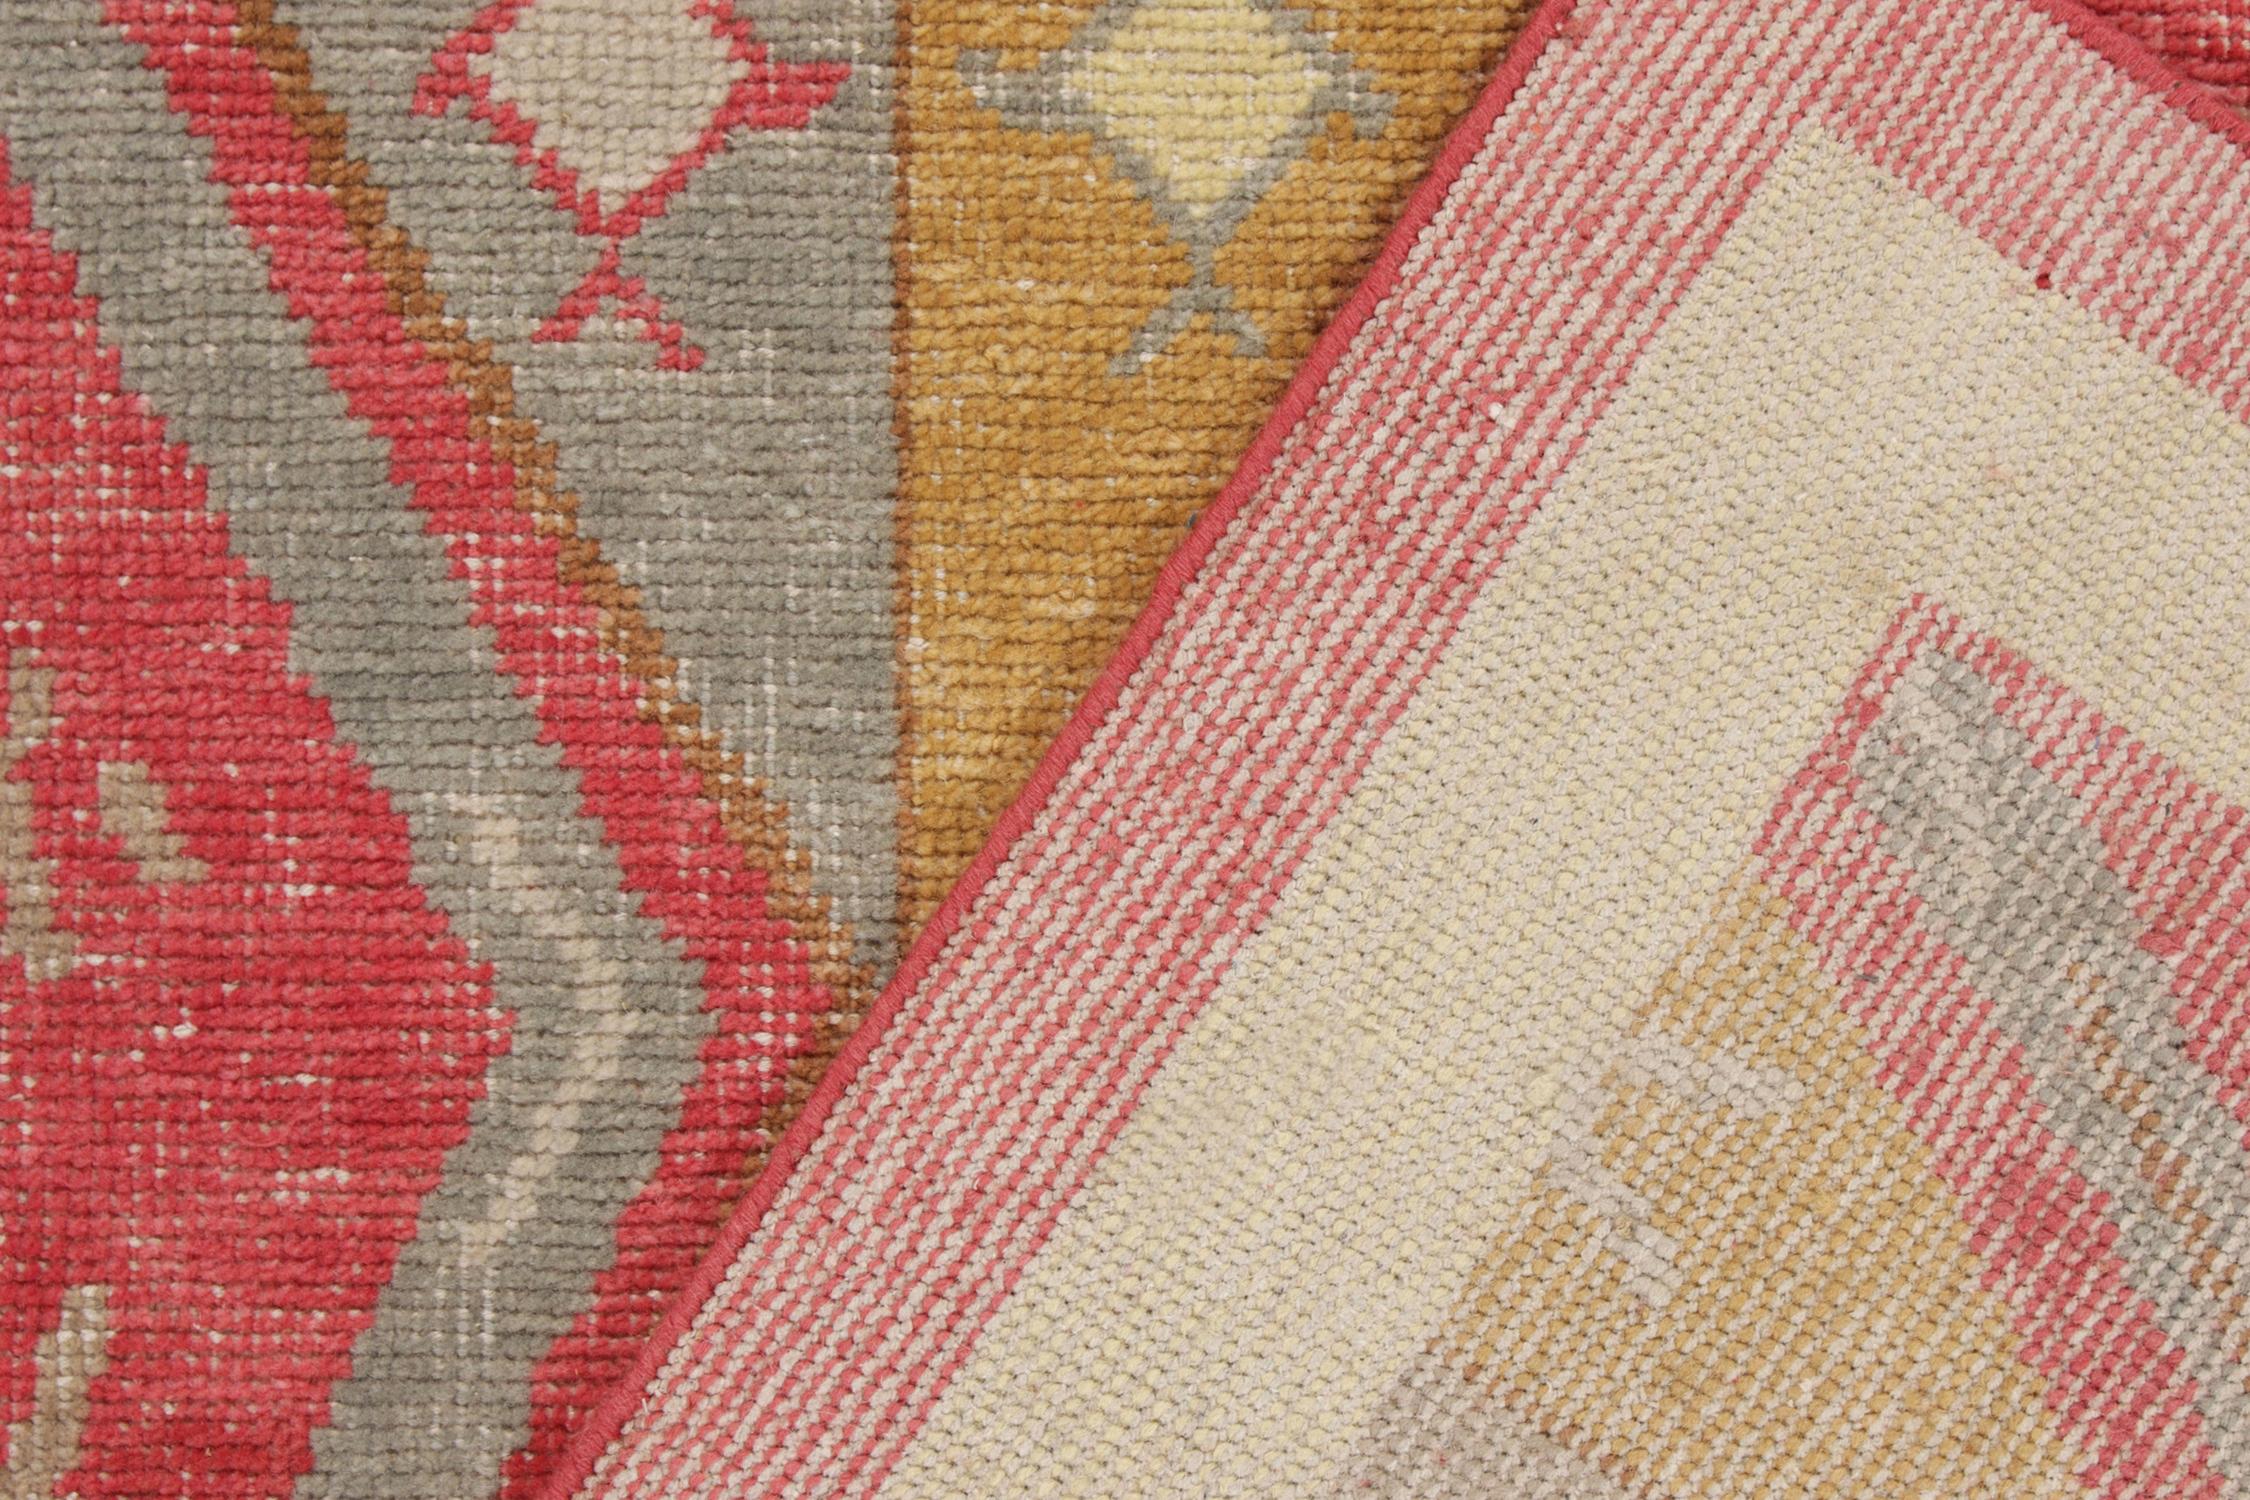 Rug & Kilim's Distressed Yuruk Style Rug in Red, Gray, Gold Diamond Pattern In New Condition For Sale In Long Island City, NY